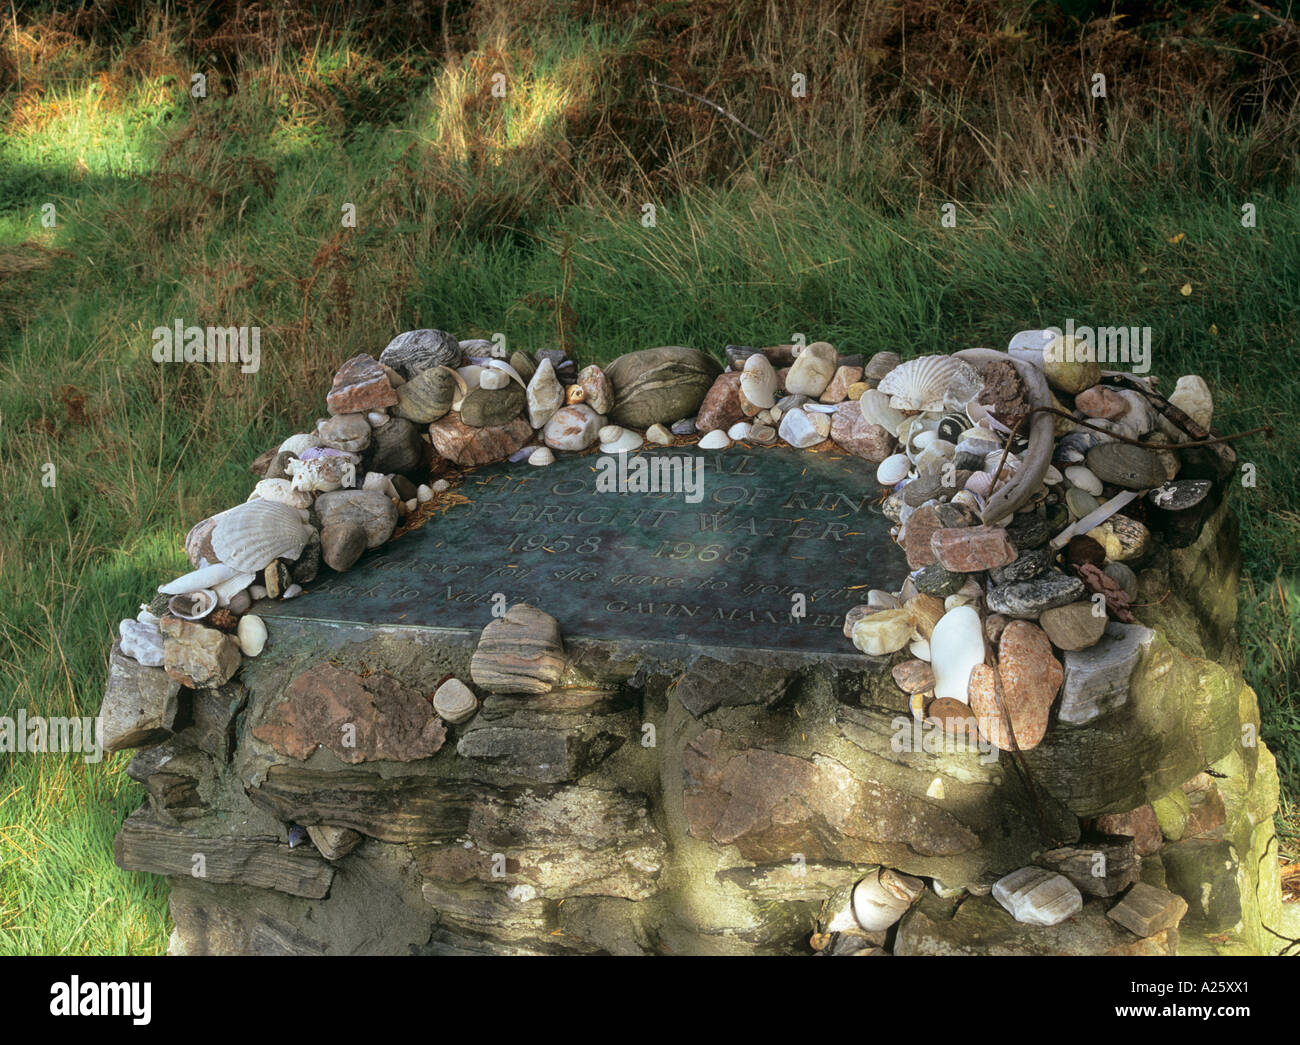 MEMORIAL CAIRN to EDAL the OTTER immortalized by Gavin Maxwell in his book Ring of Bright Water. Sandaig Highland Scotland UK Stock Photo